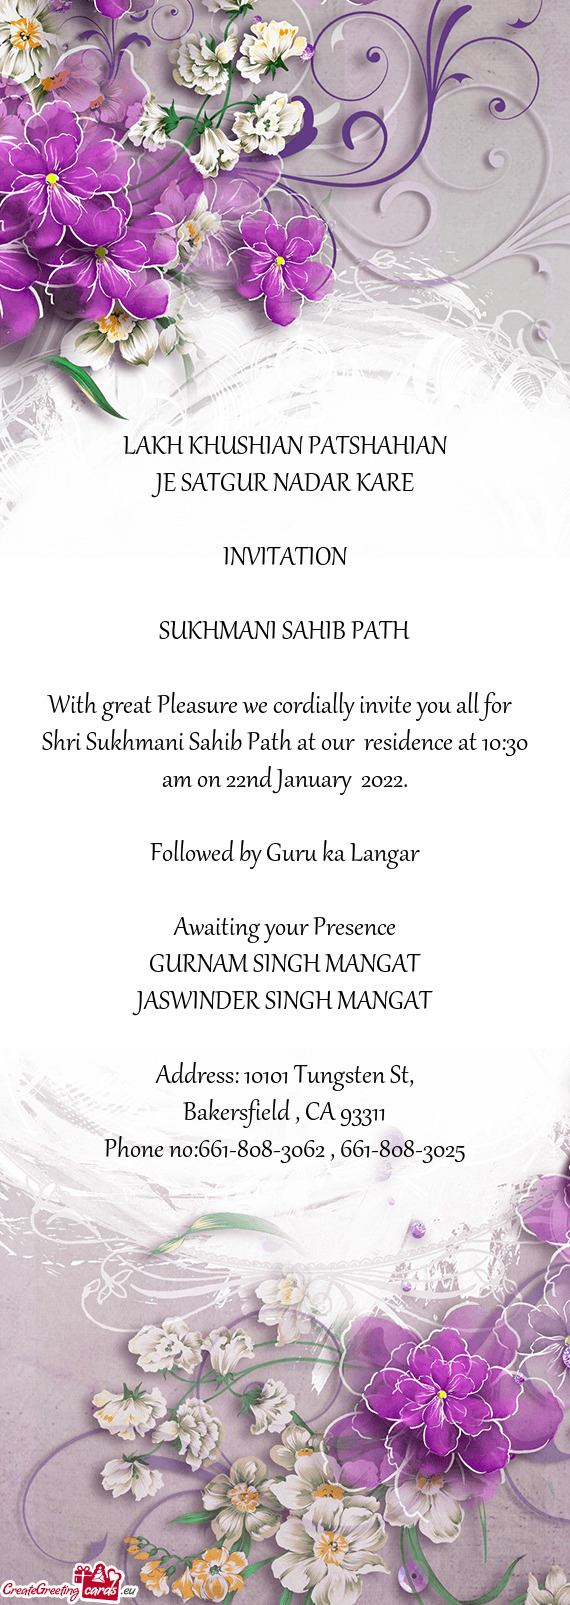 Shri Sukhmani Sahib Path at our residence at 10:30 am on 22nd January 2022